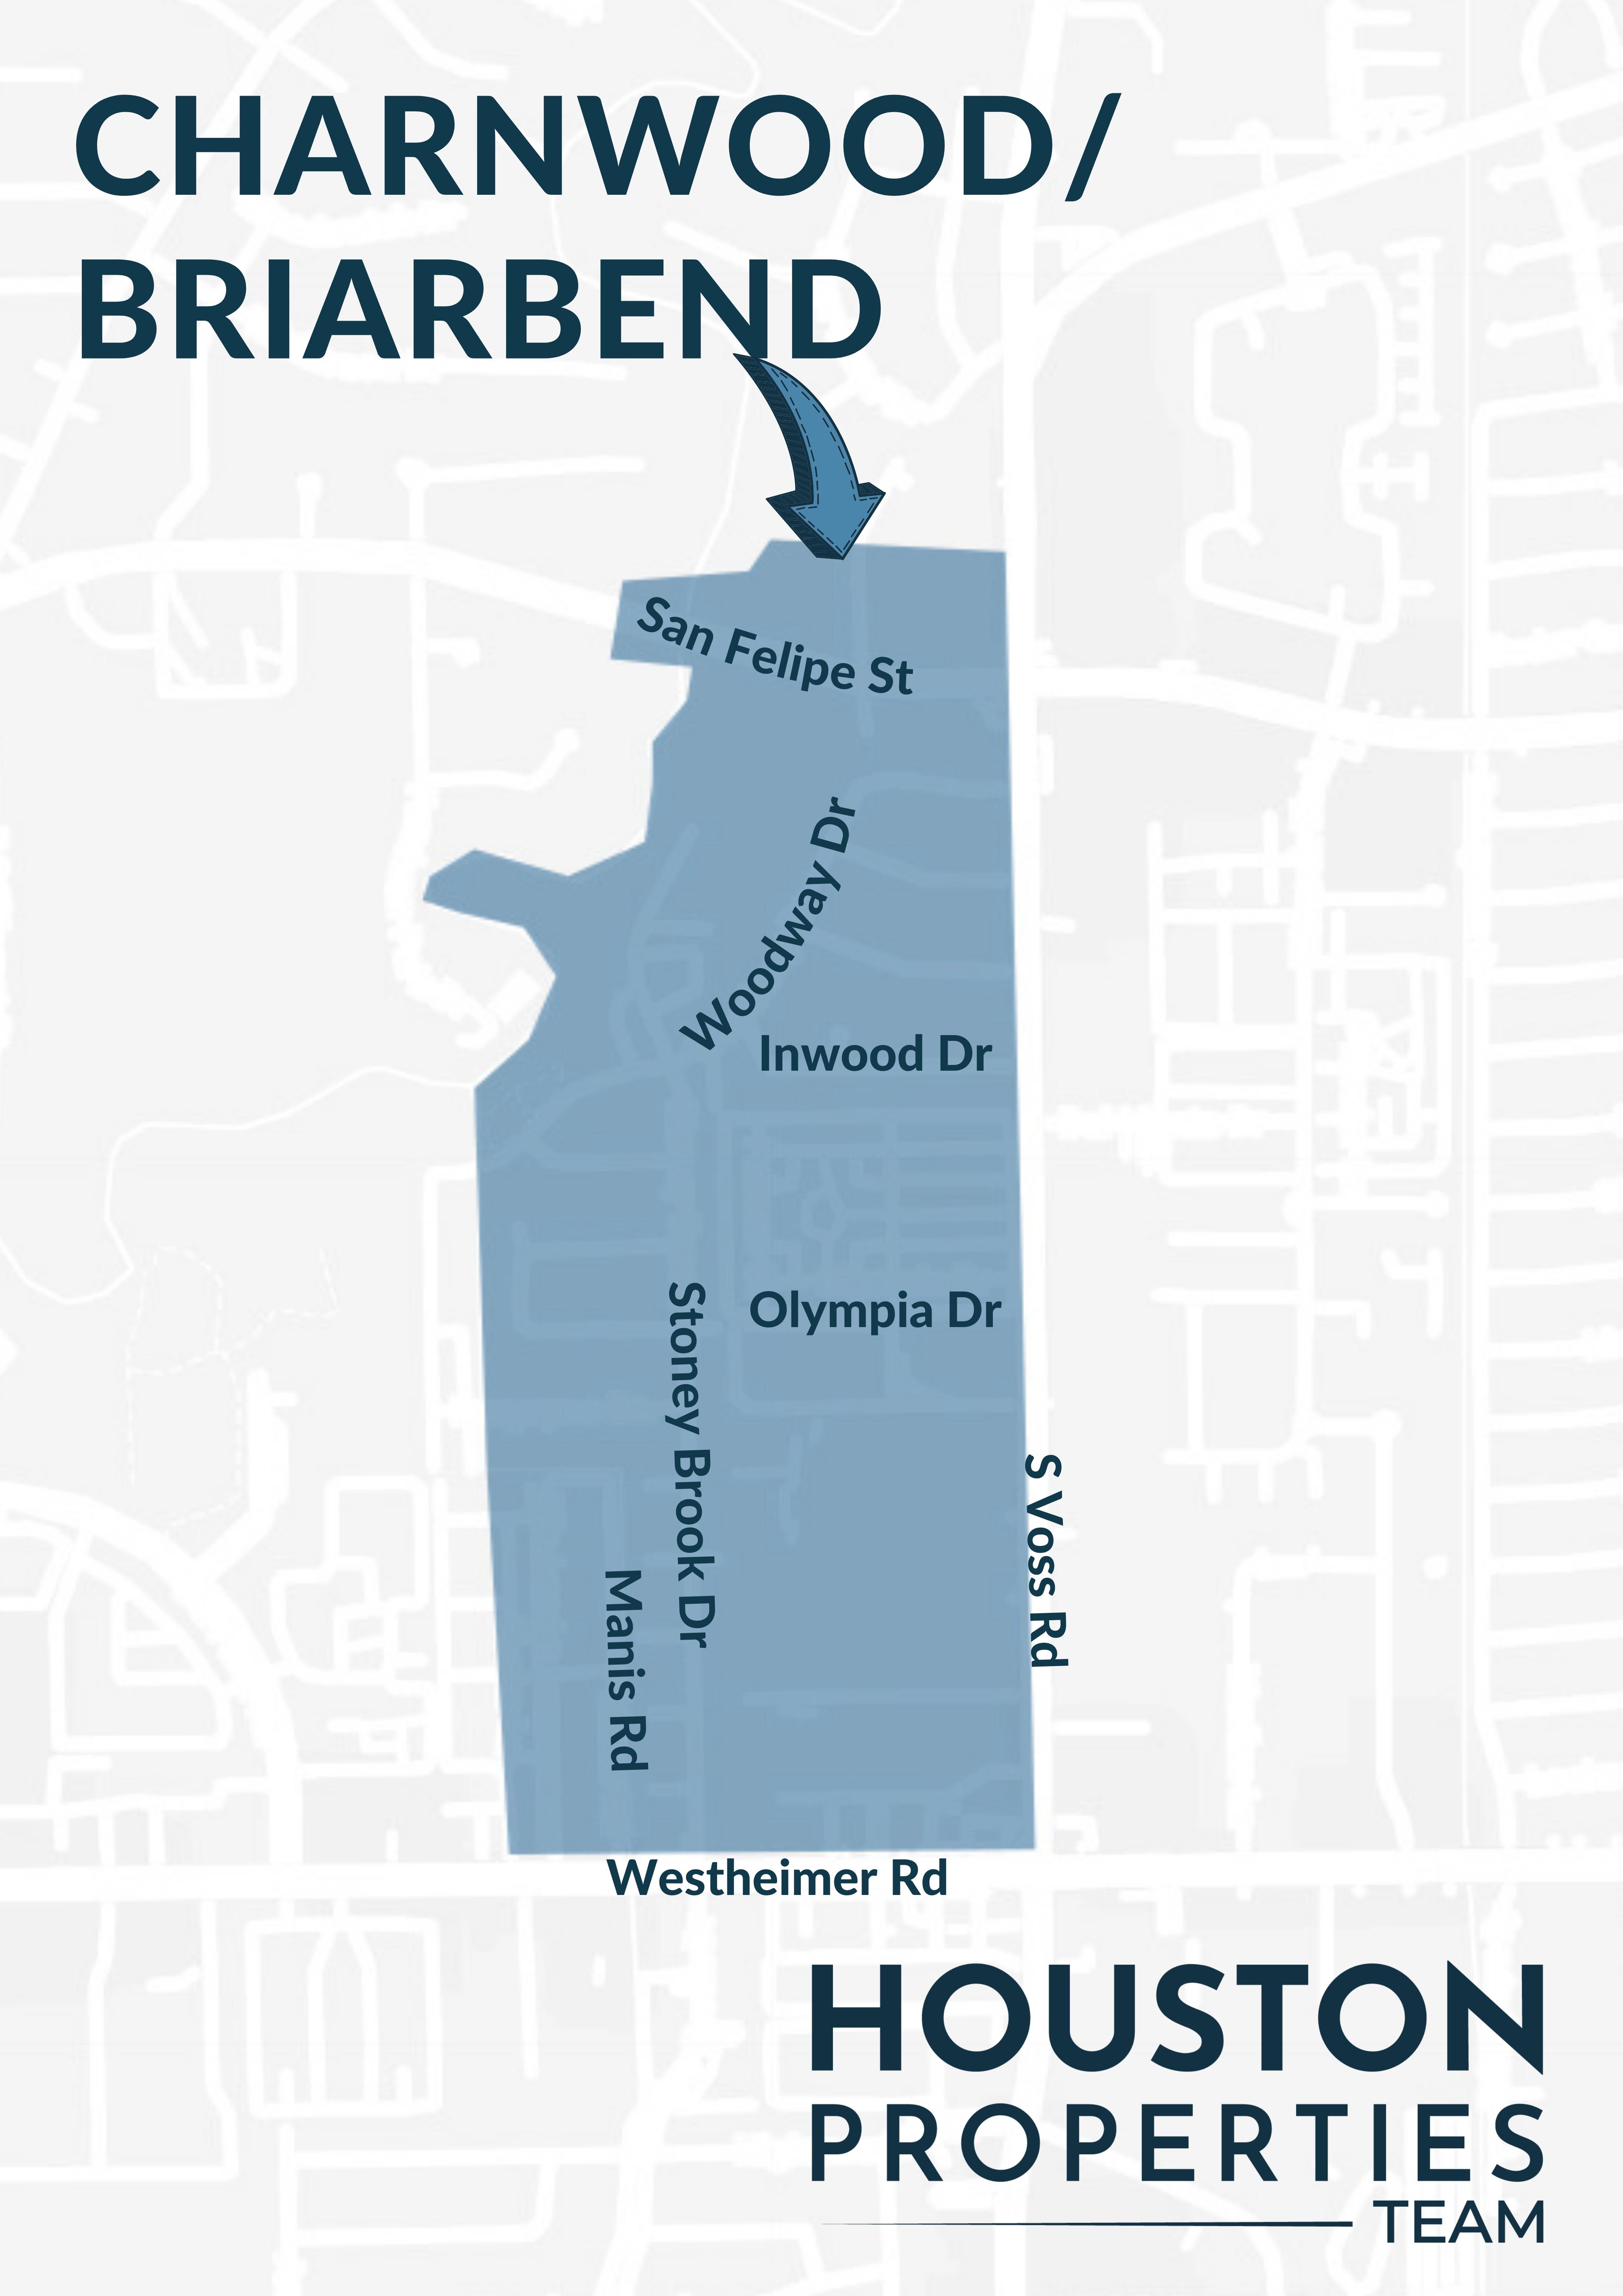 Map of Charnwood/Briarbend